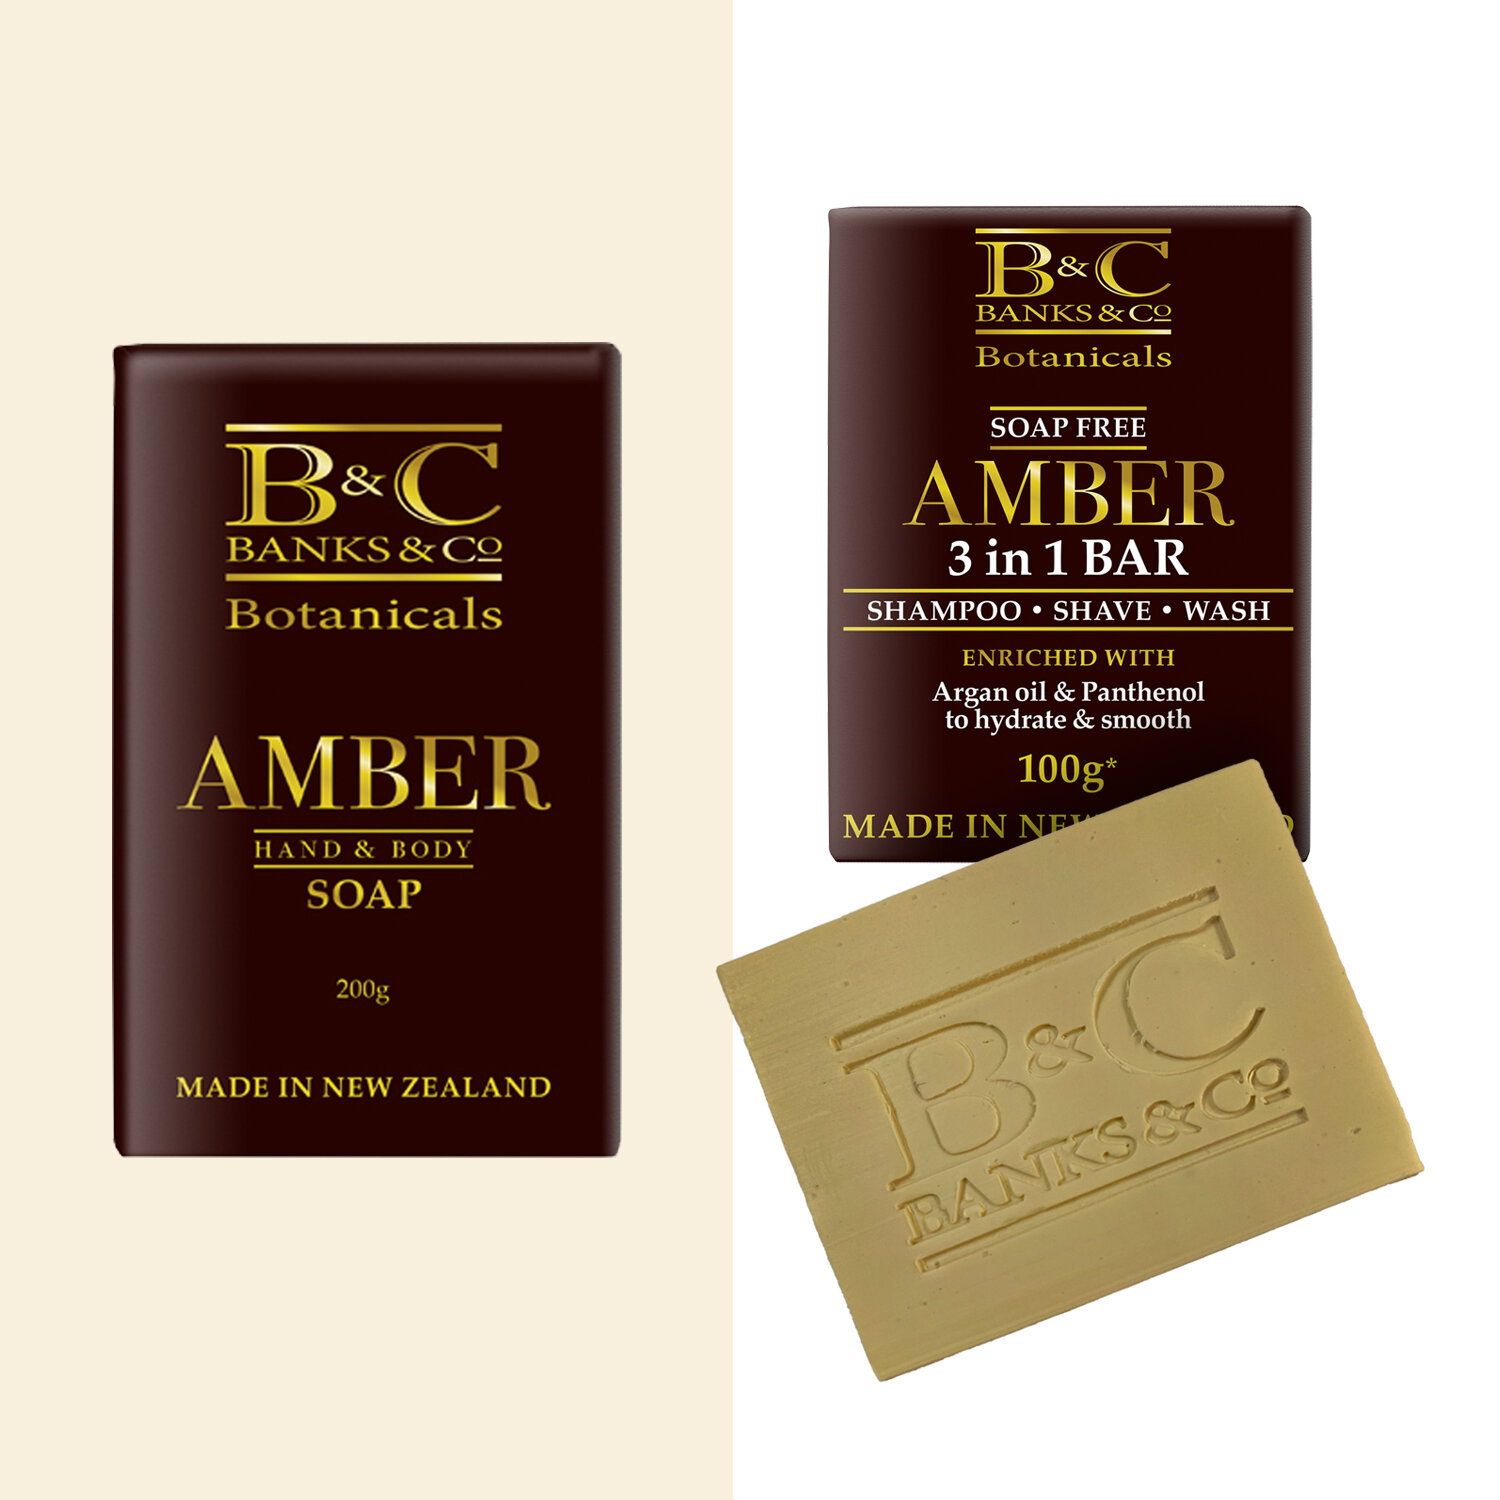 Amber Soap plus 3-in-1 Bar — Special Intro Offer!